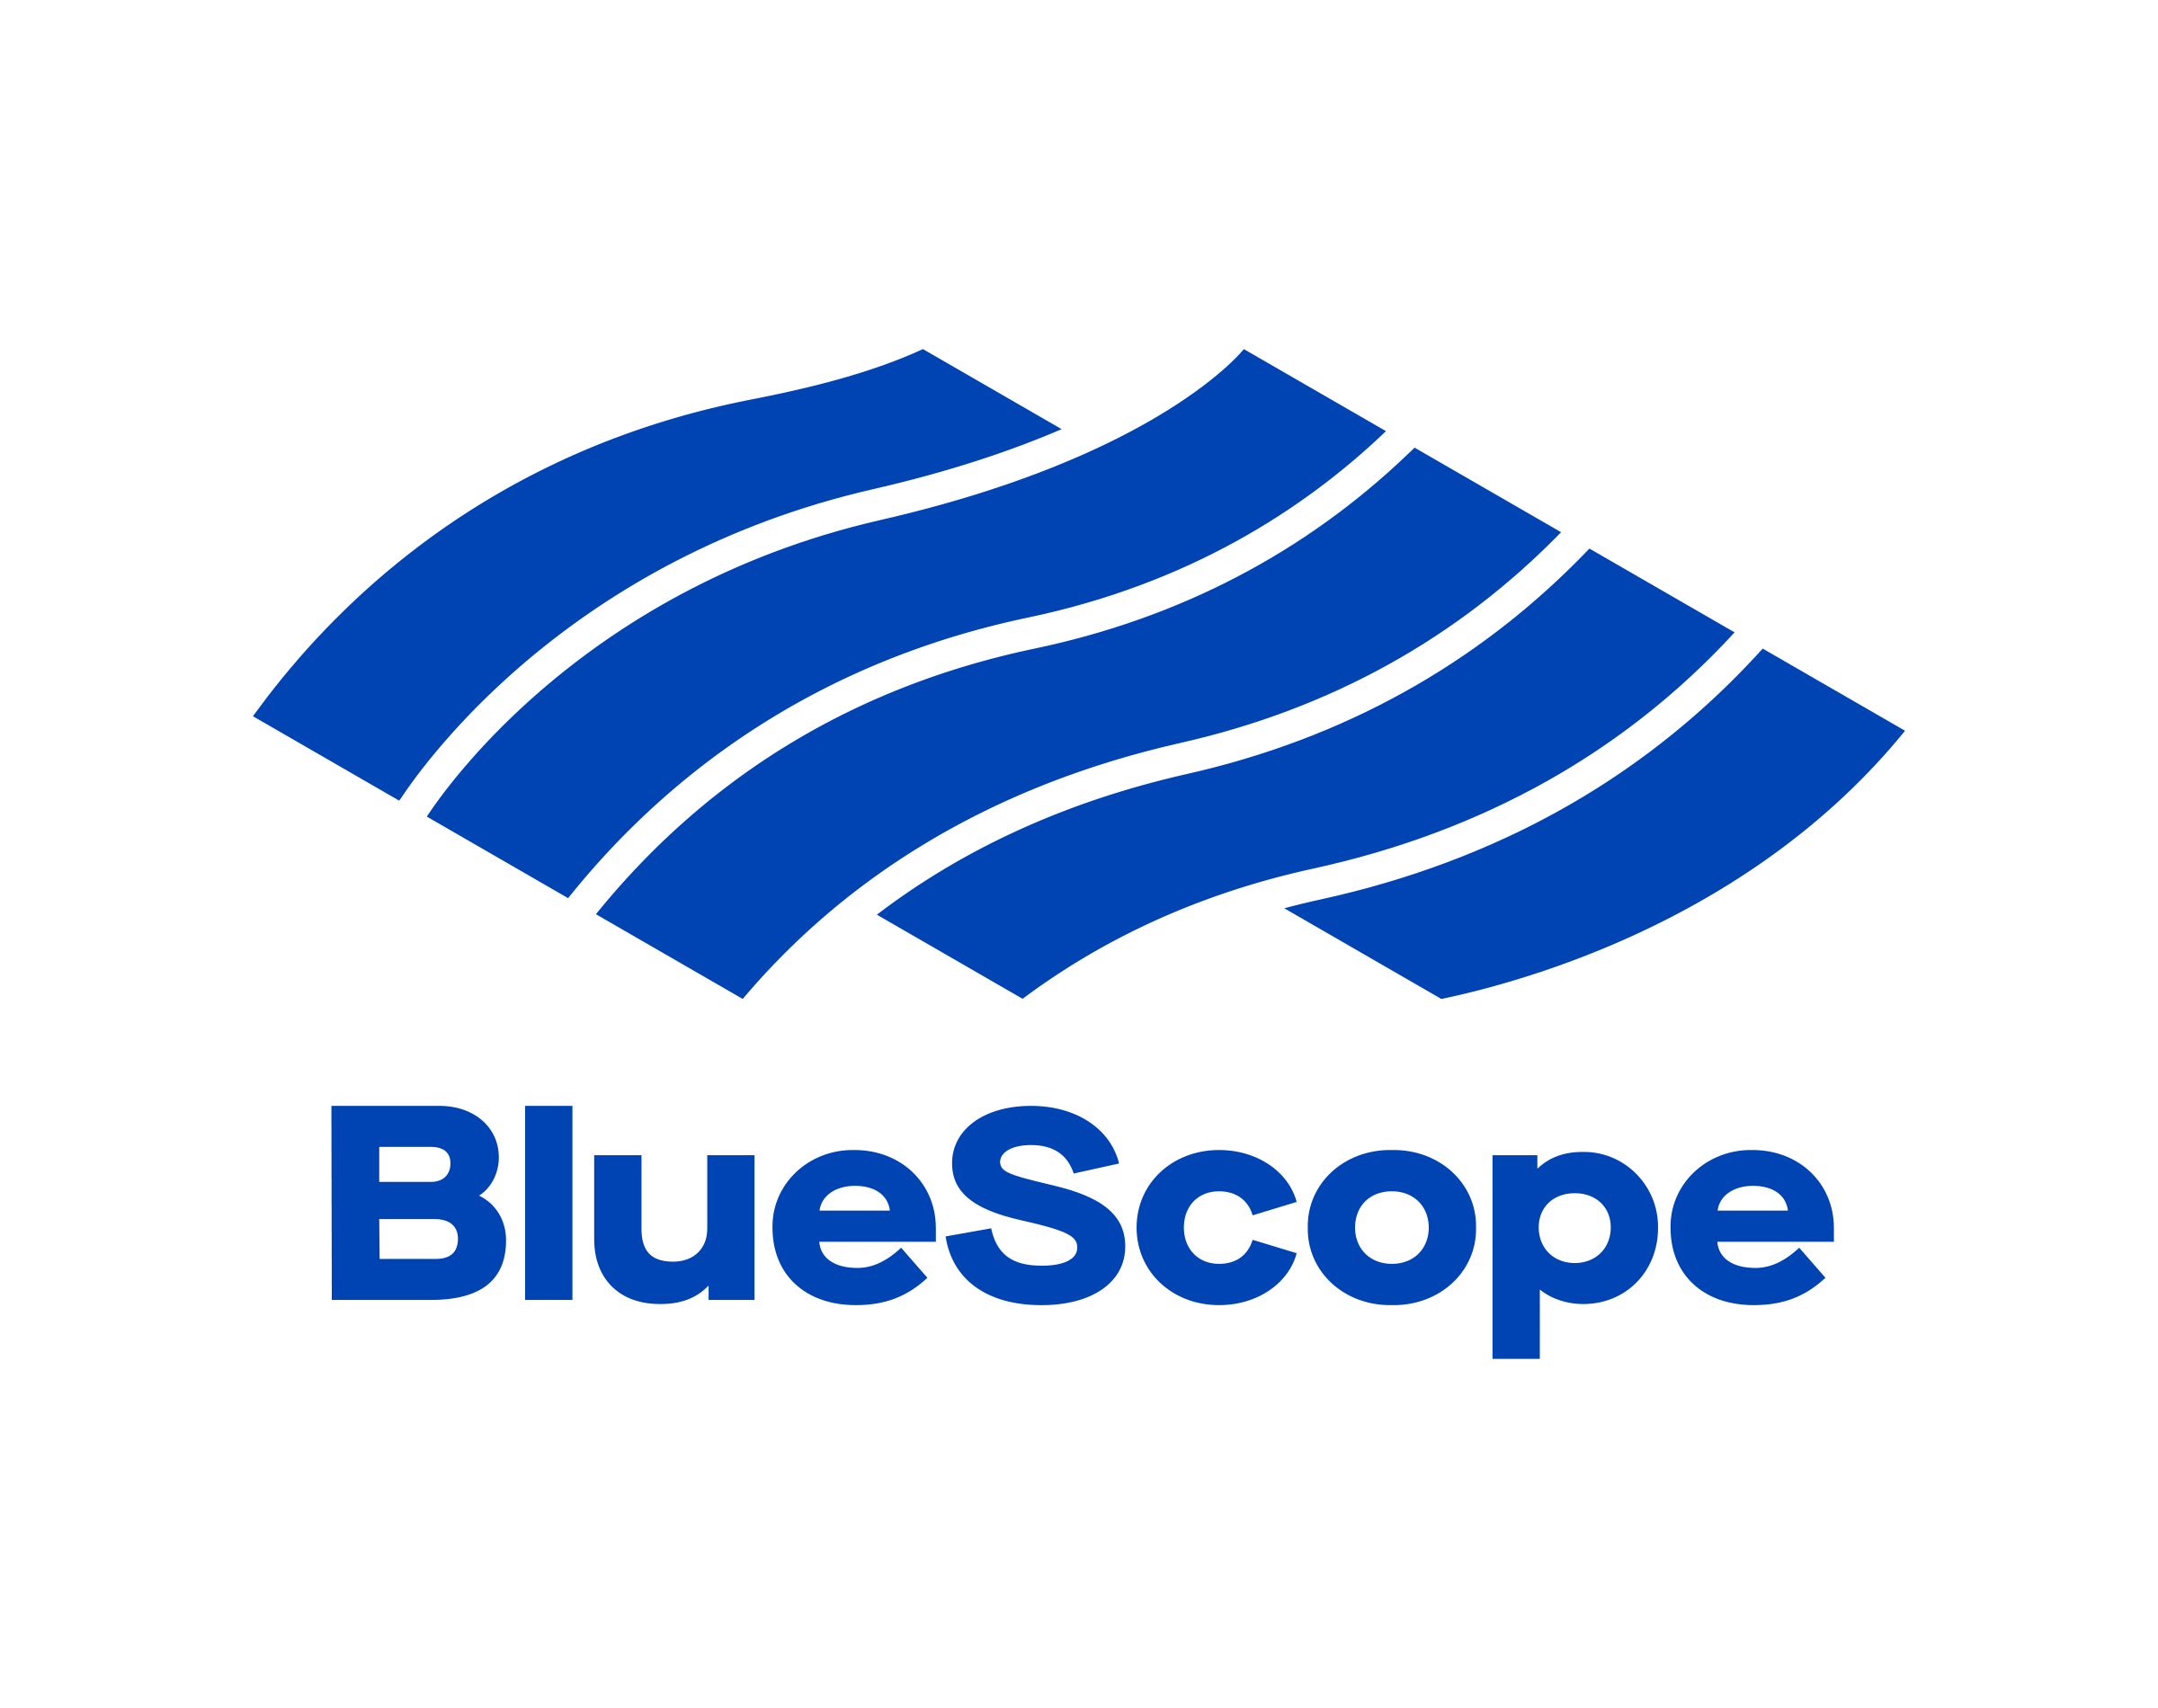 Learn how Eagle Point’s Pinnacle Series e-learning solution helped BlueScope in this case study.